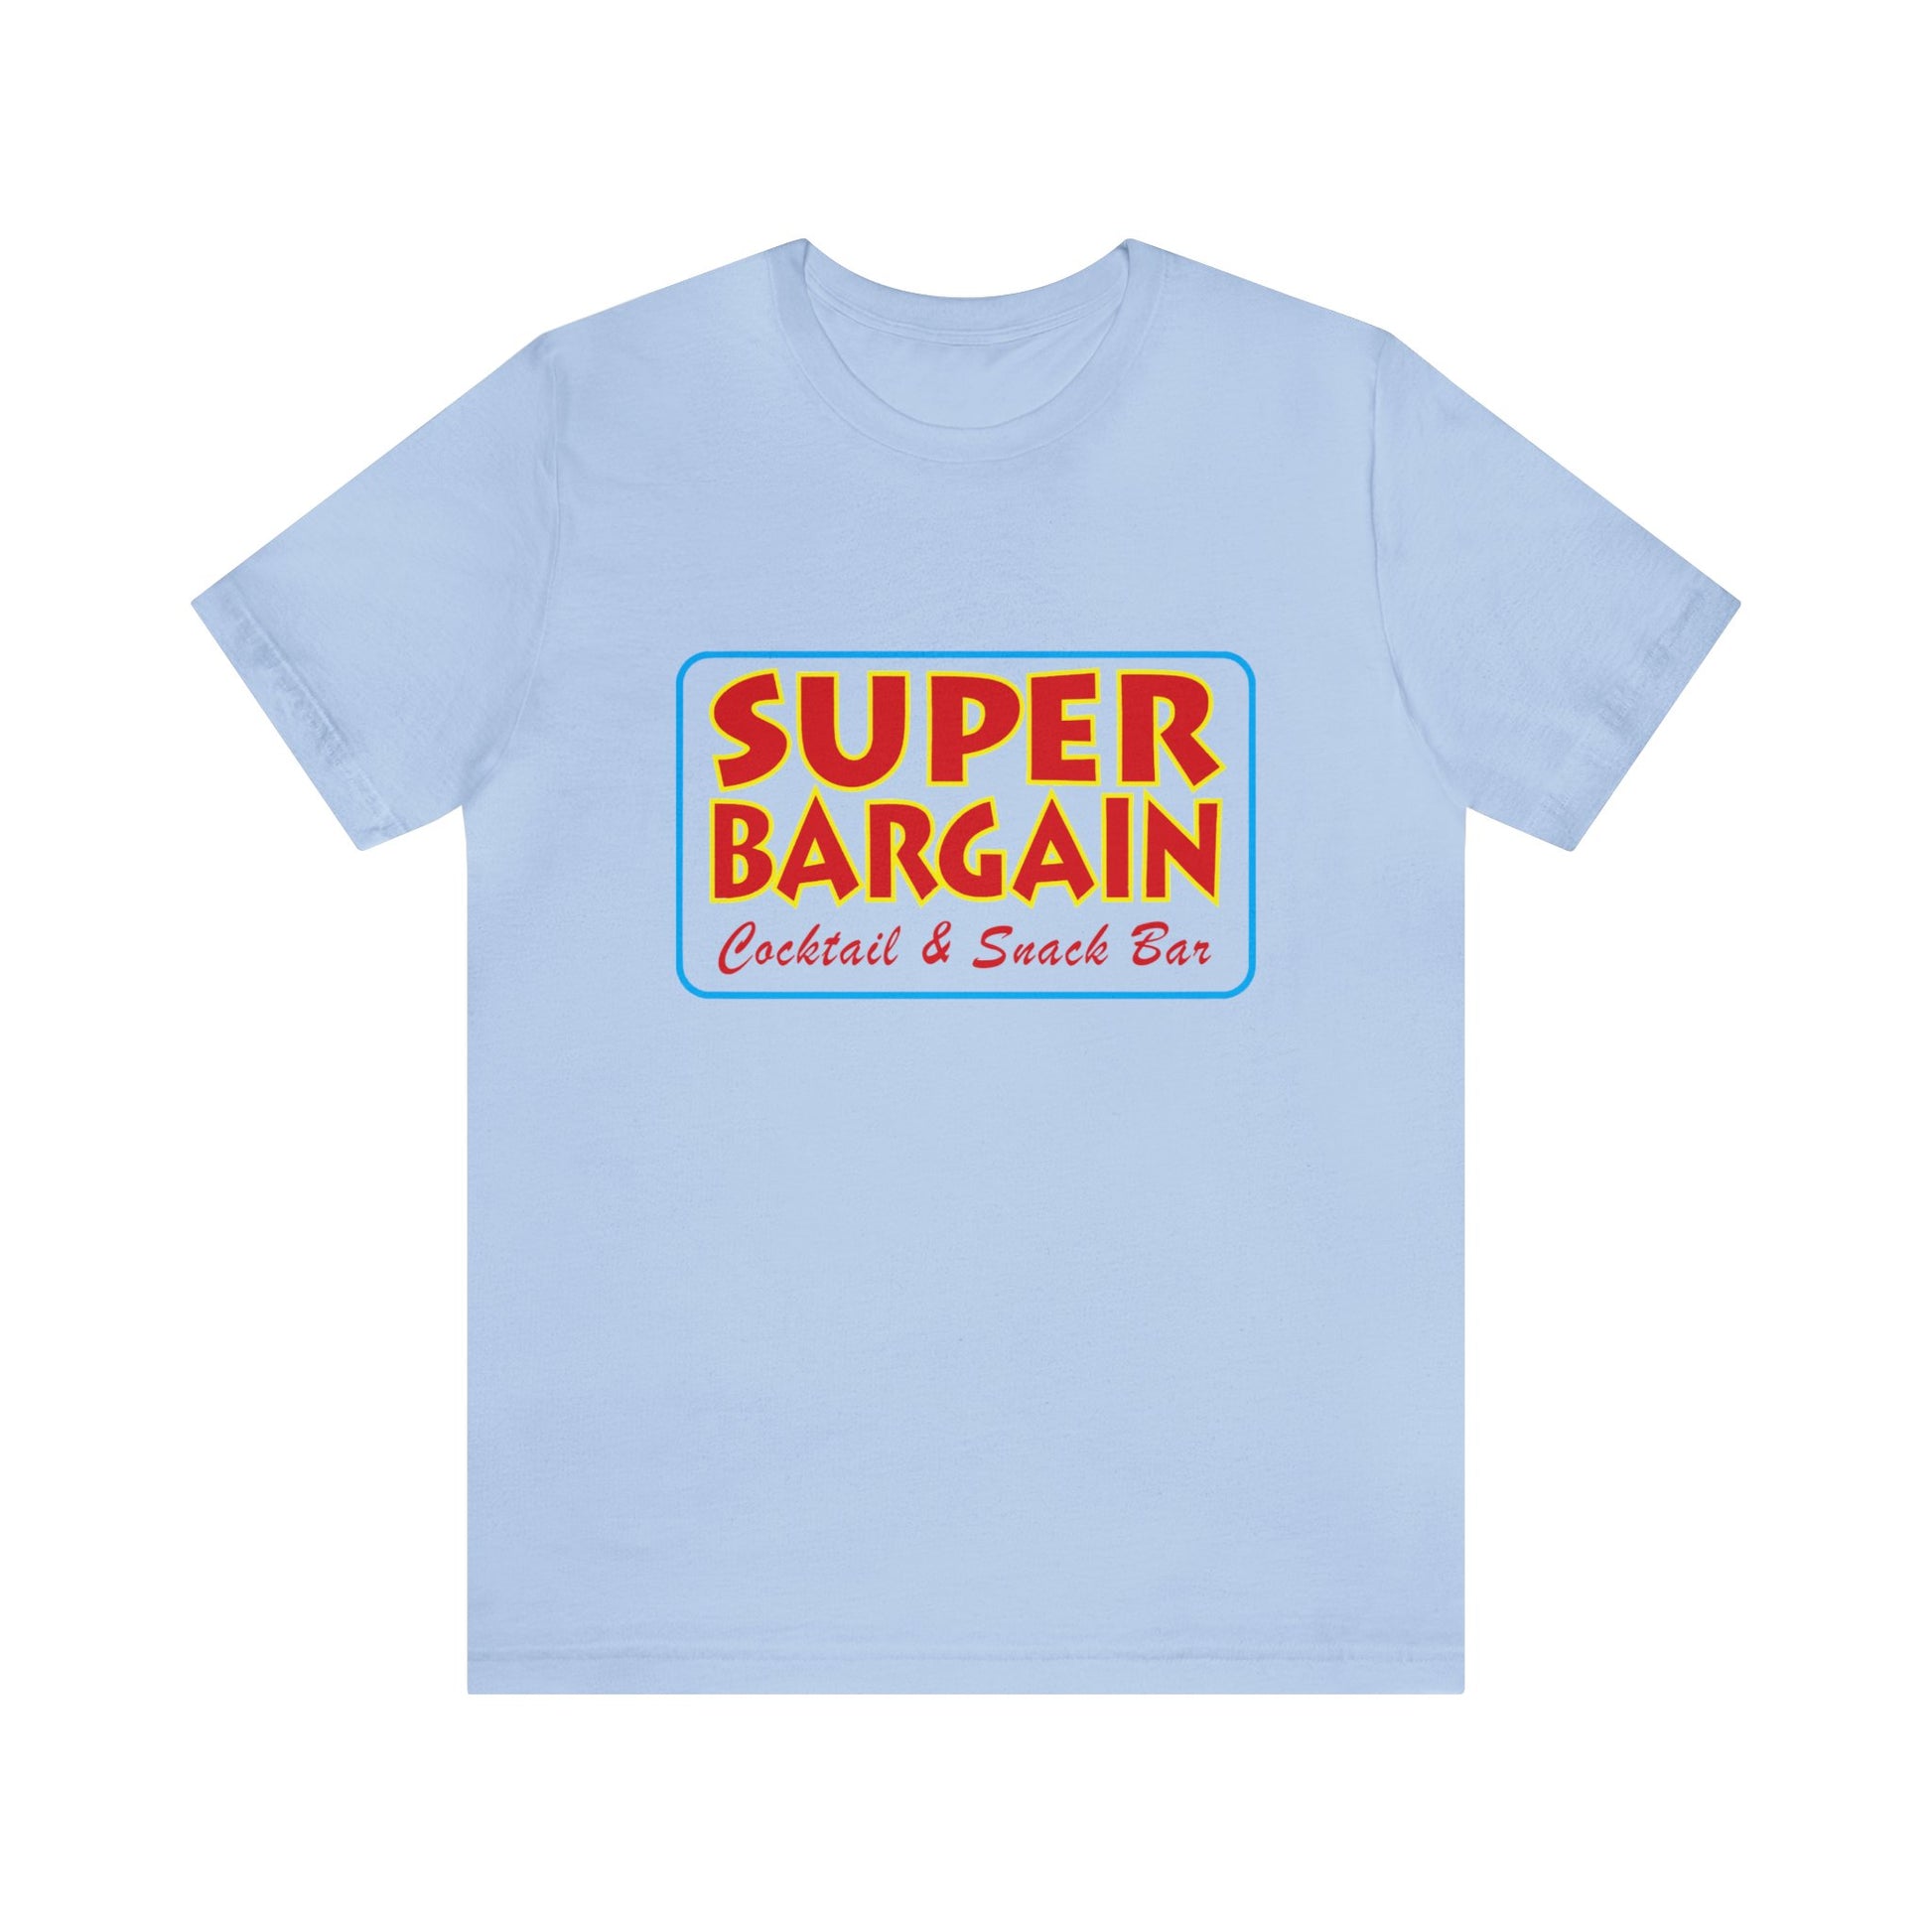 Unisex Jersey Short Sleeve Tee with a bright yellow and red logo in the center that reads "SUPER BARGAIN, Cabbagetown Cocktail & Snack Bar, Toronto." by Printify.